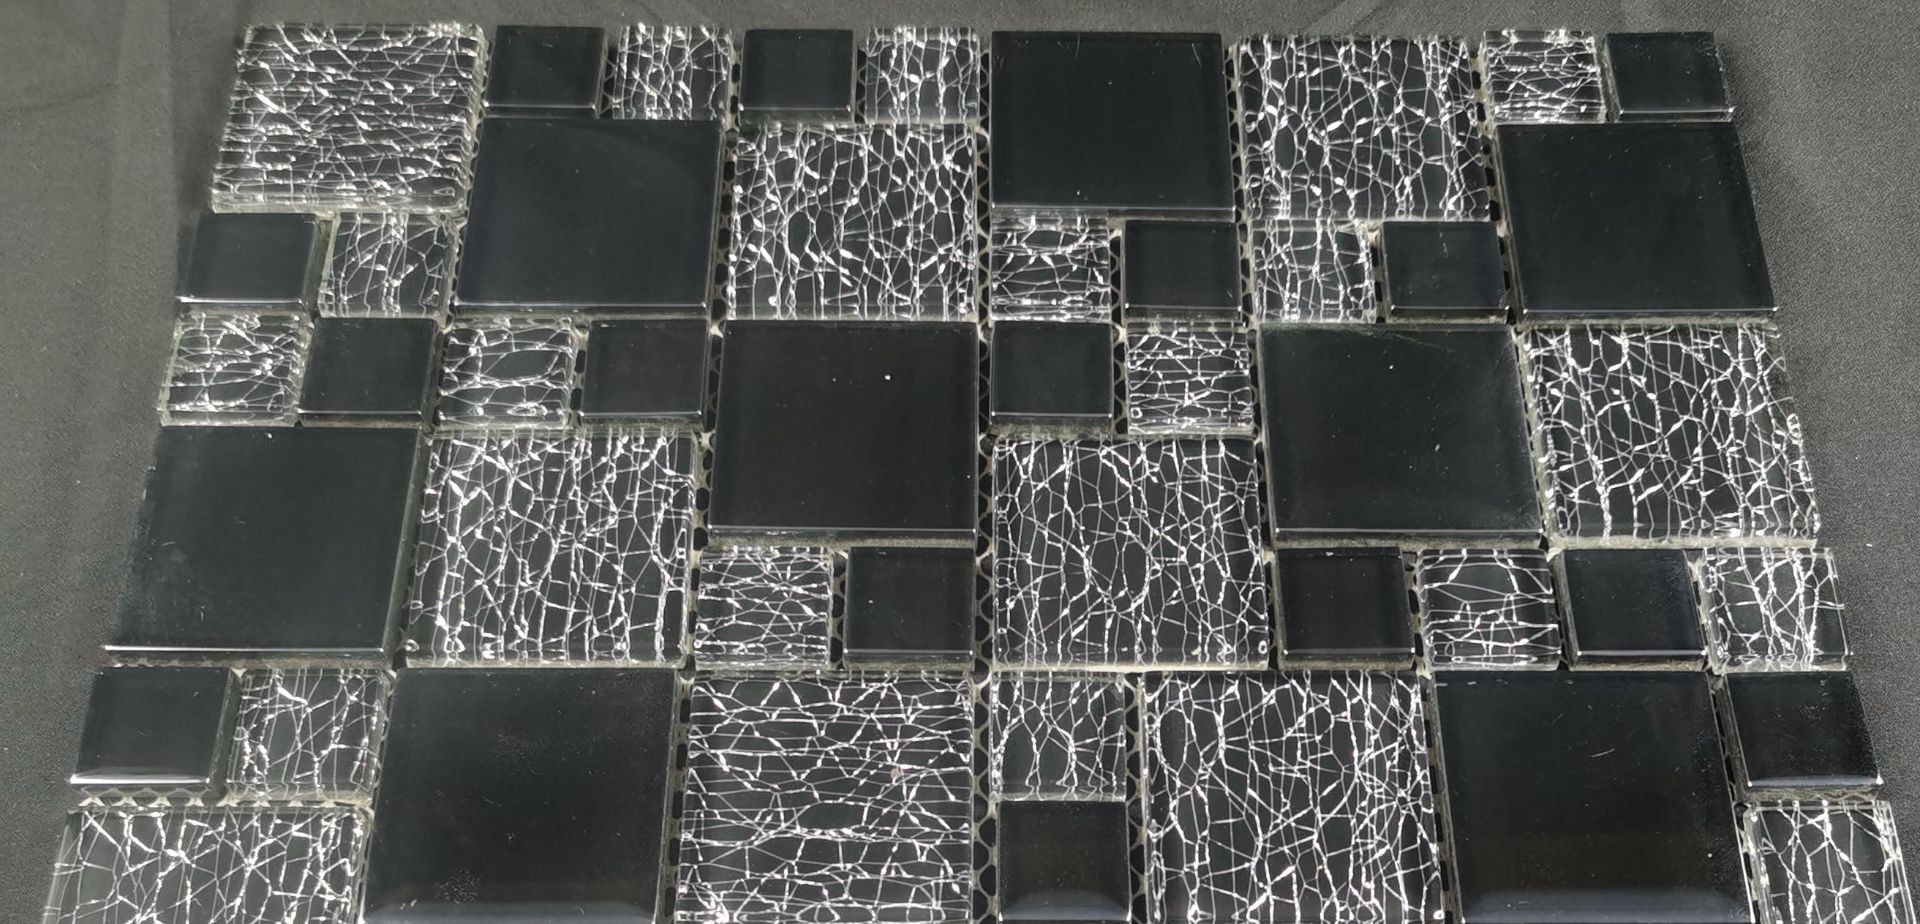 2 Square Metres - High Quality Glass/Stainless Steel Mosaic Tiles-22 Sheets - Image 4 of 5